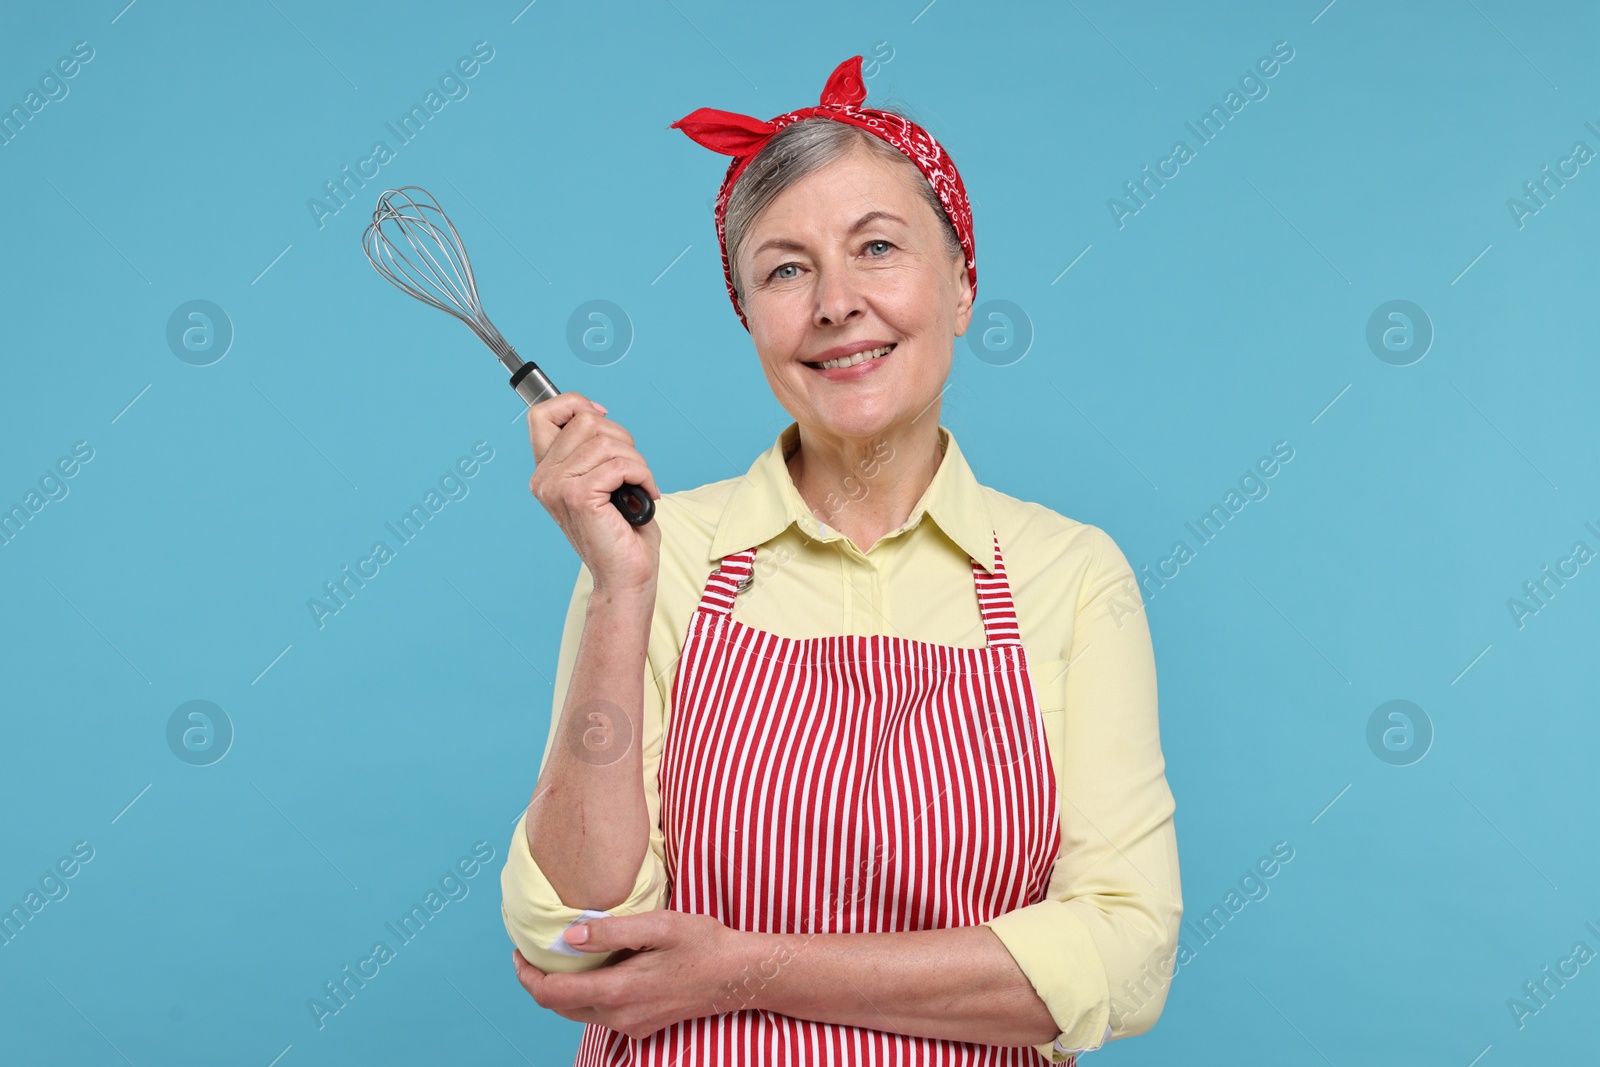 Photo of Happy housewife with whisk on light blue background